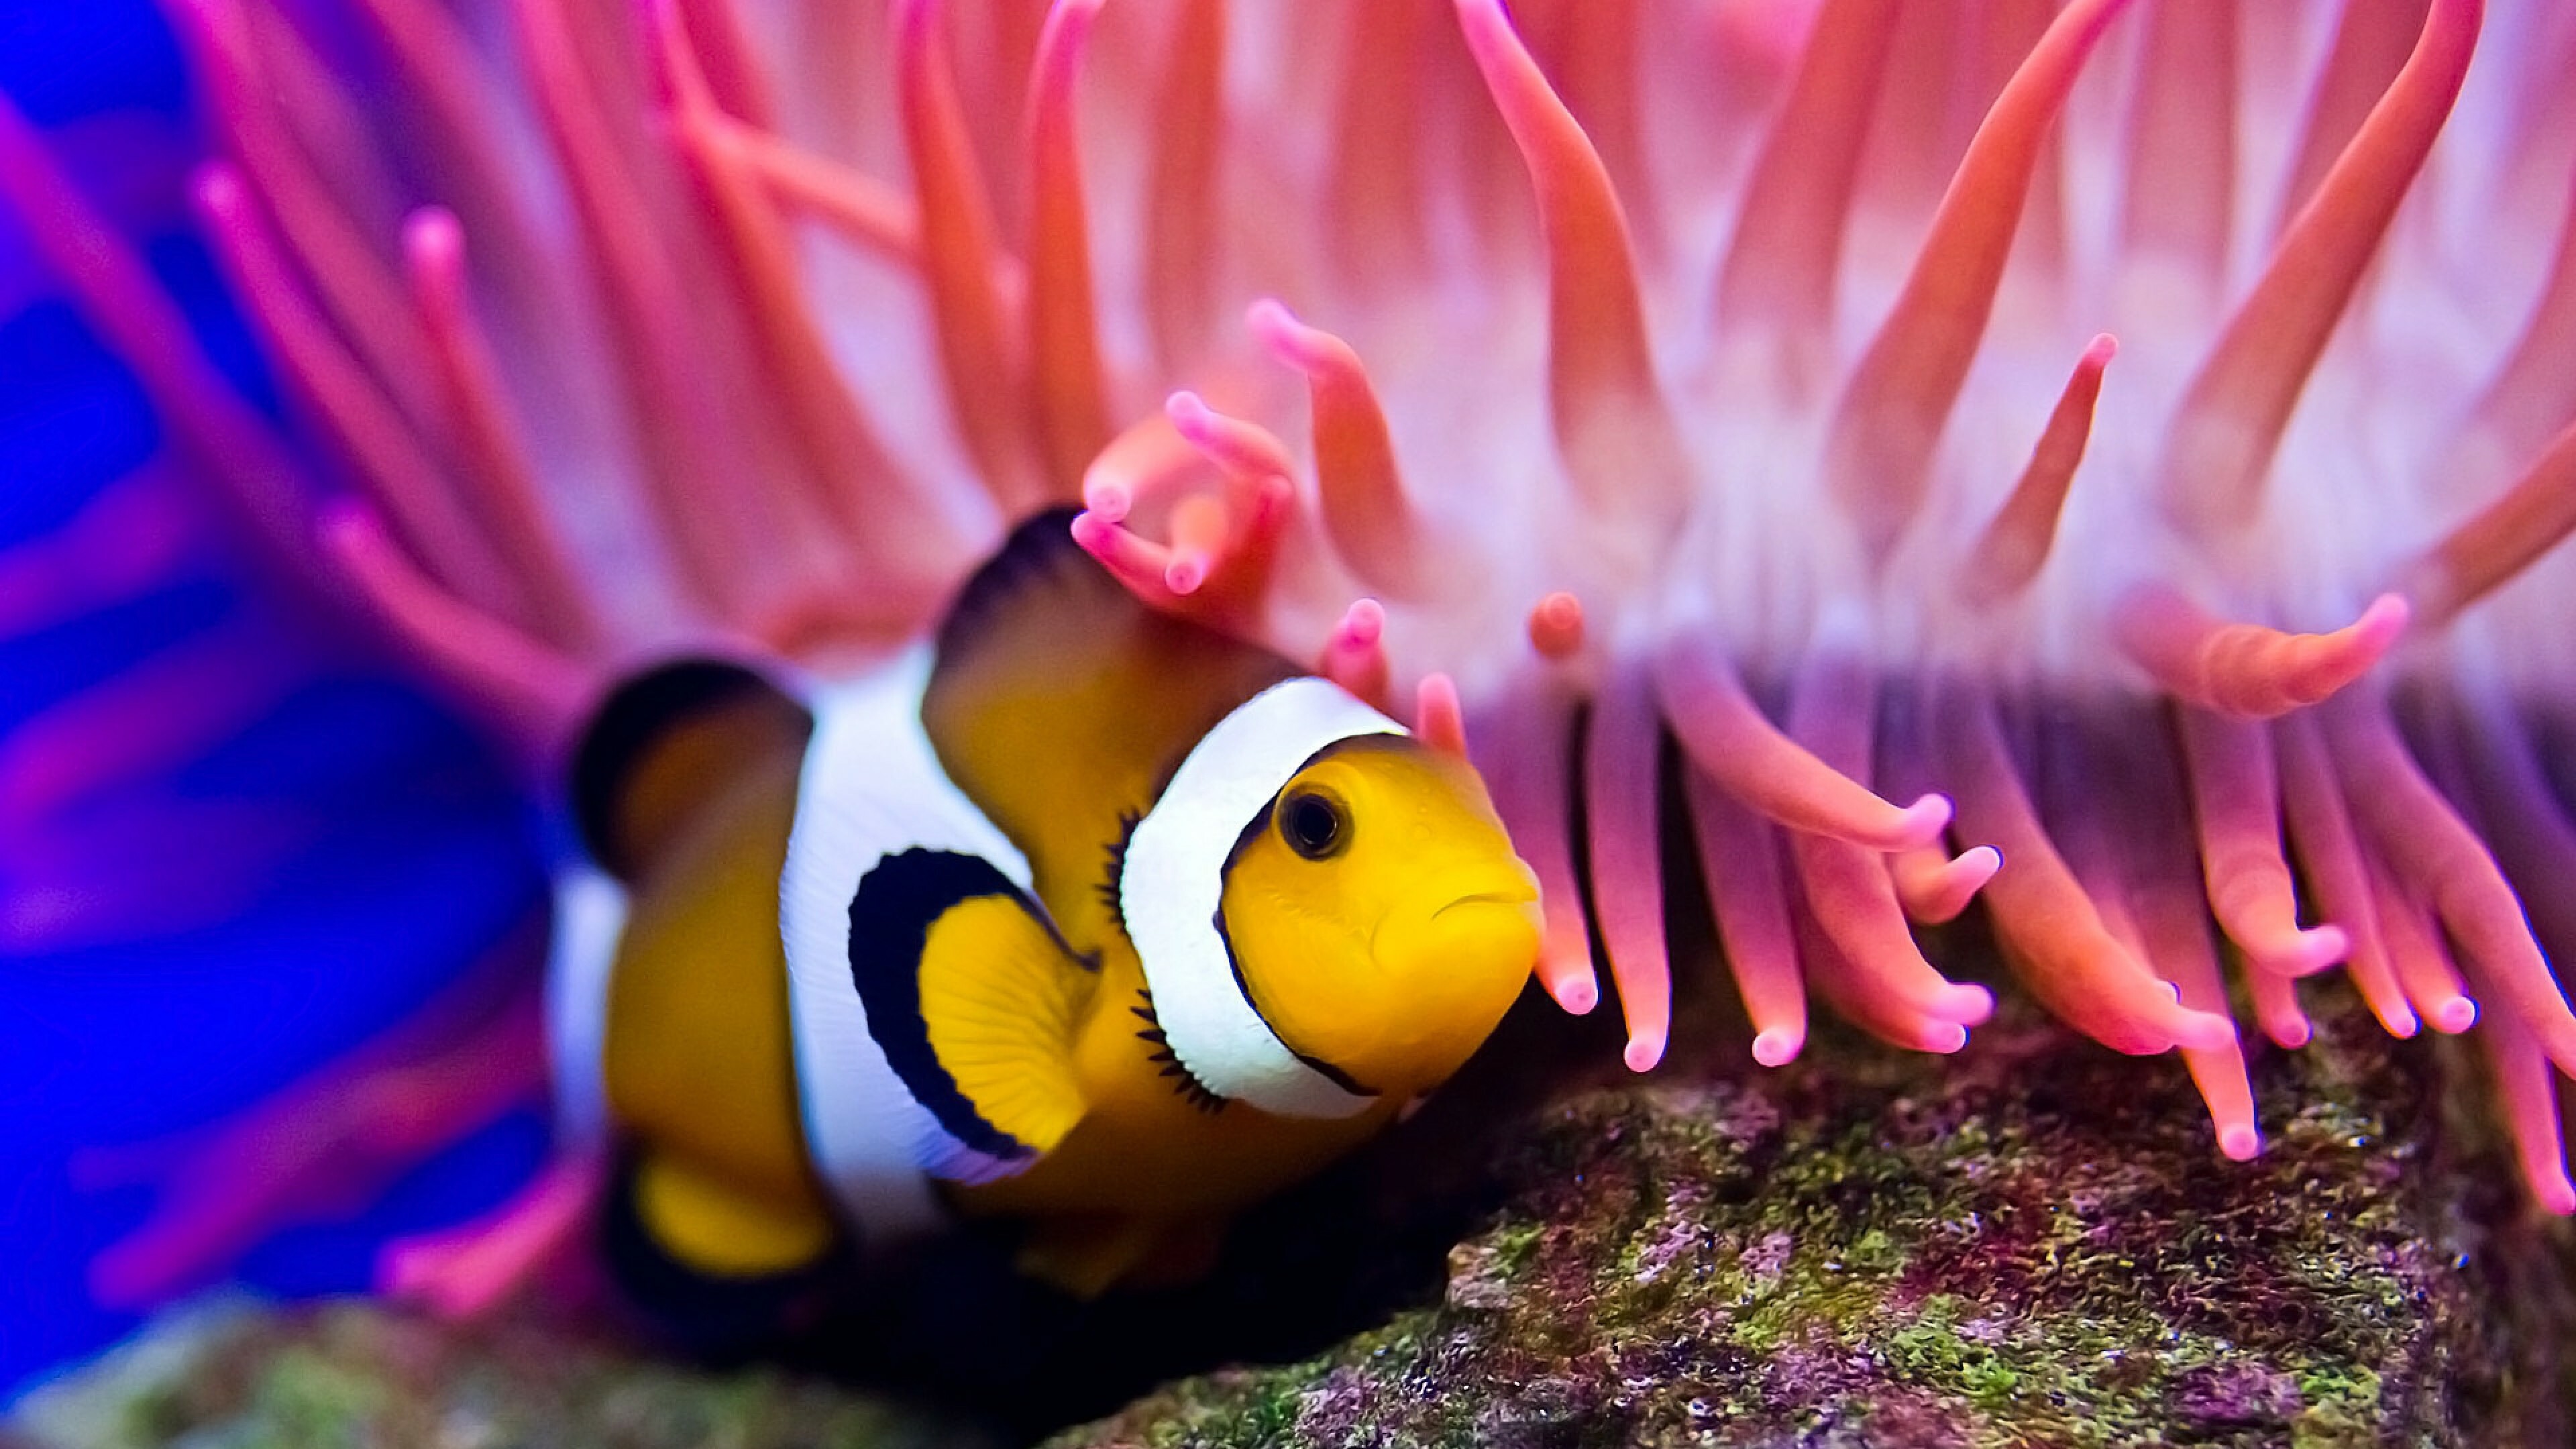 Fish: Amphiprion ocellaris, Found in different colors, depending on where they are located. 3840x2160 4K Wallpaper.